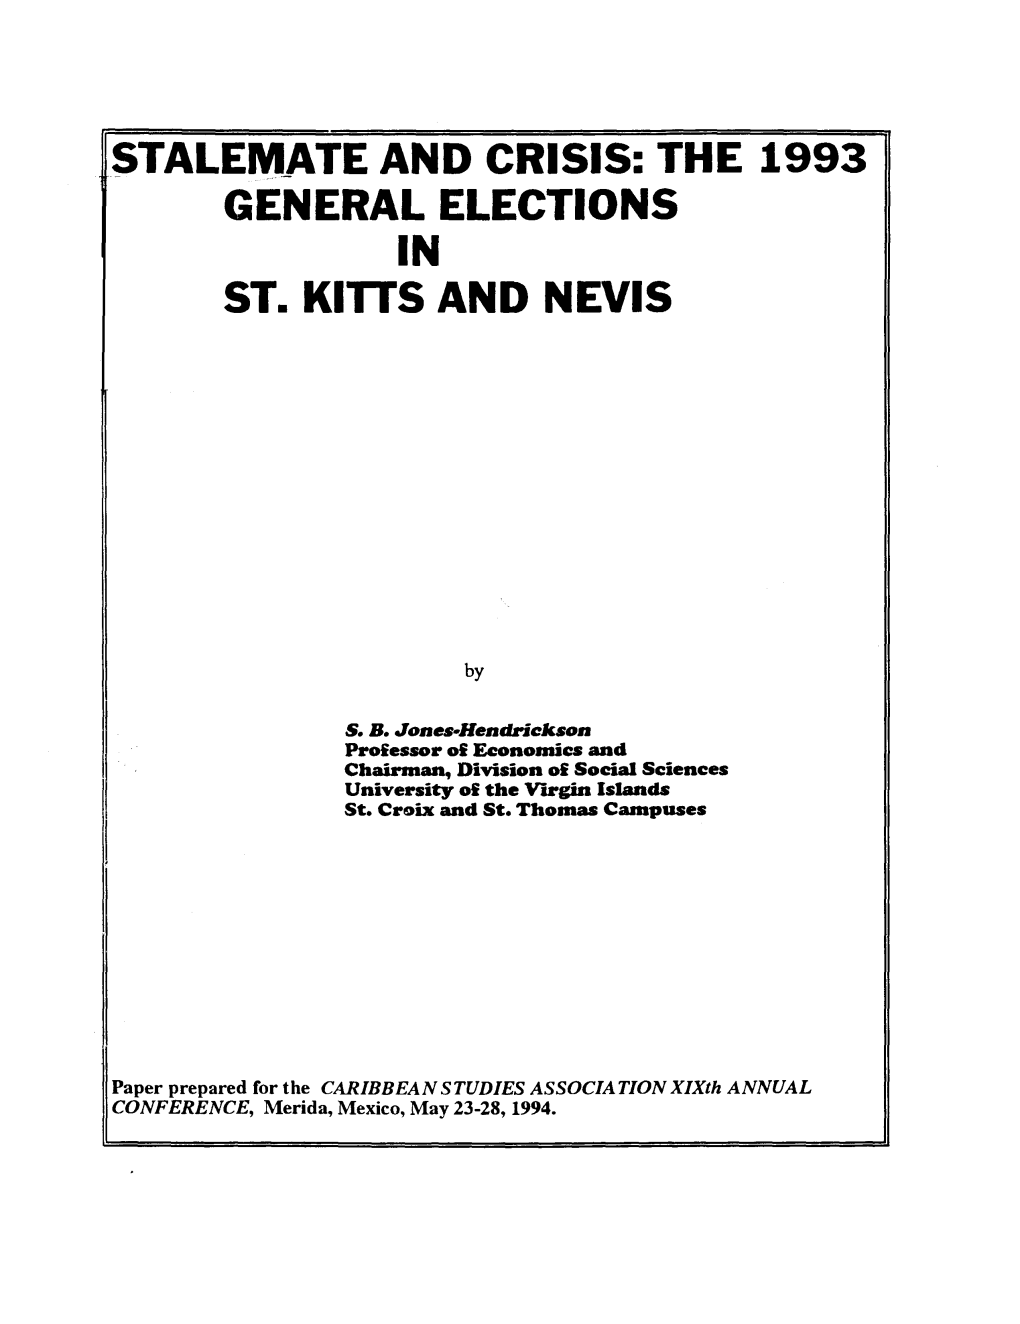 The 1993 General Elections in St. Kitts and Nevis